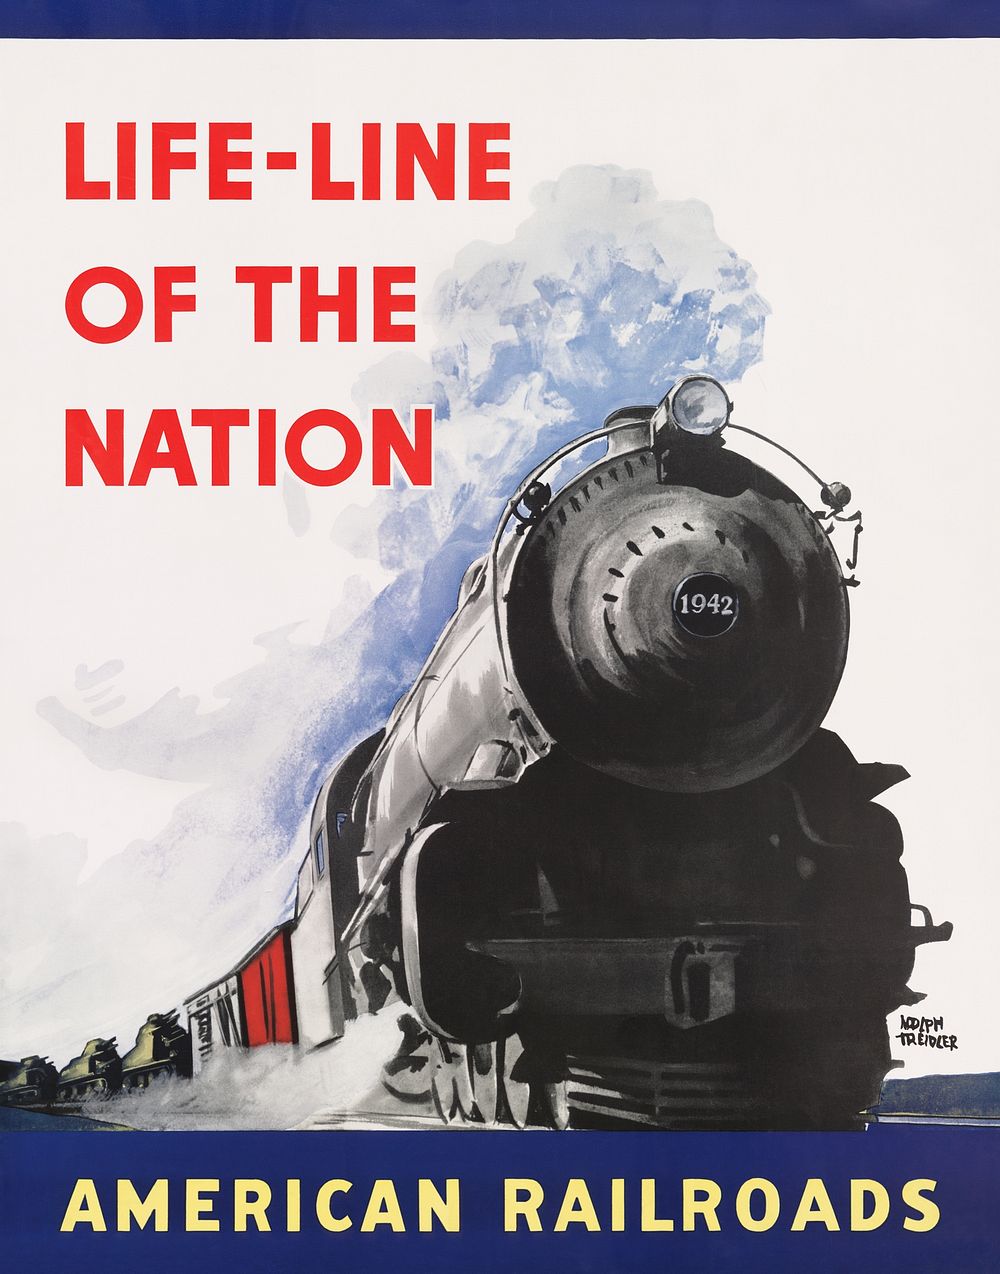 Life-line of the nation American railroads (1942), vintage poster by Adolph Treidler. Original public domain image from the…